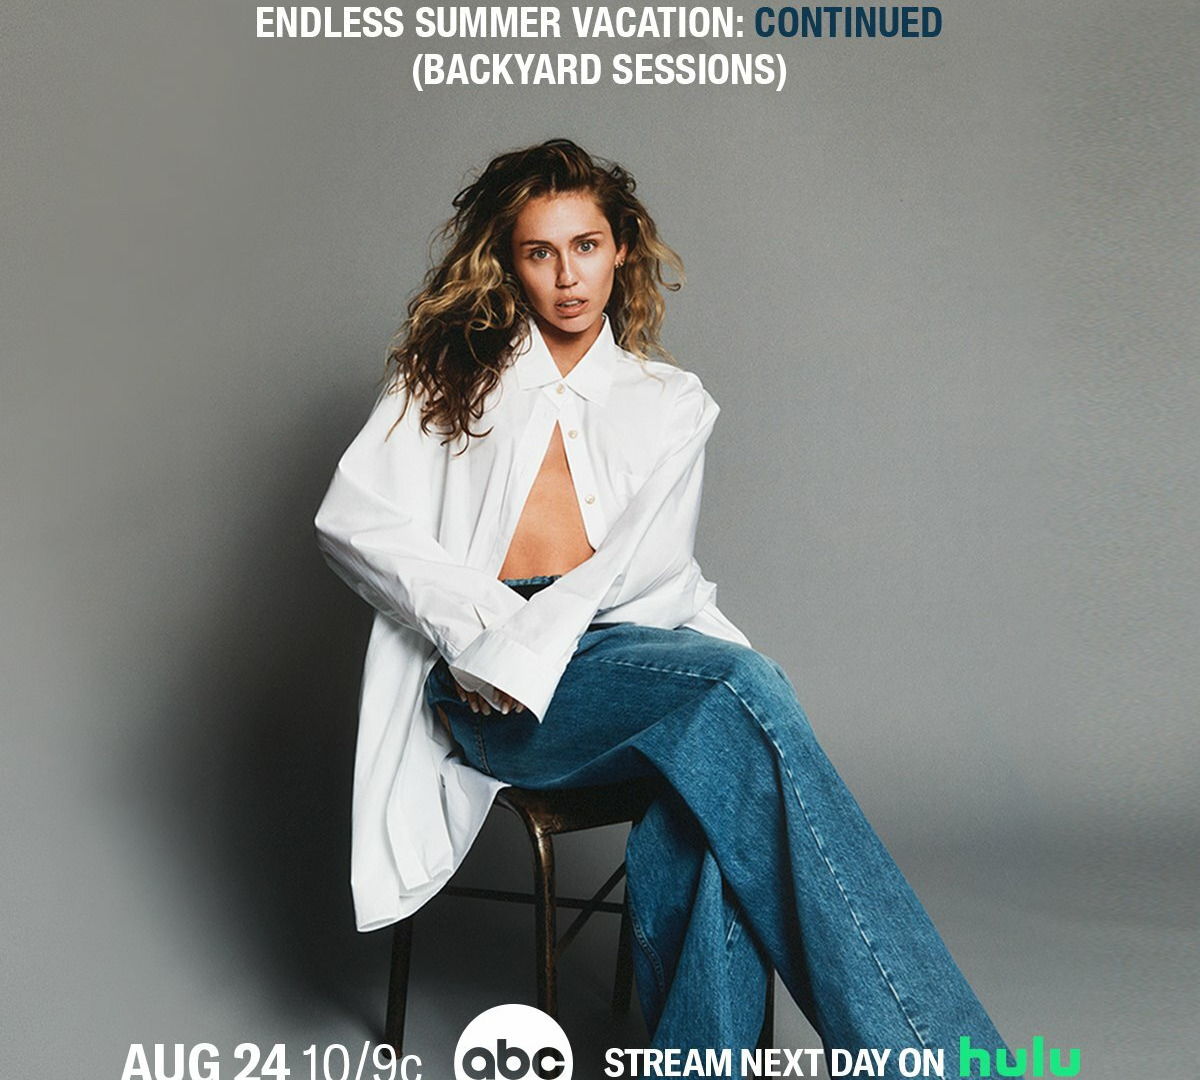 Show Miley Cyrus: Endless Summer Vacation (Backyard Sessions)